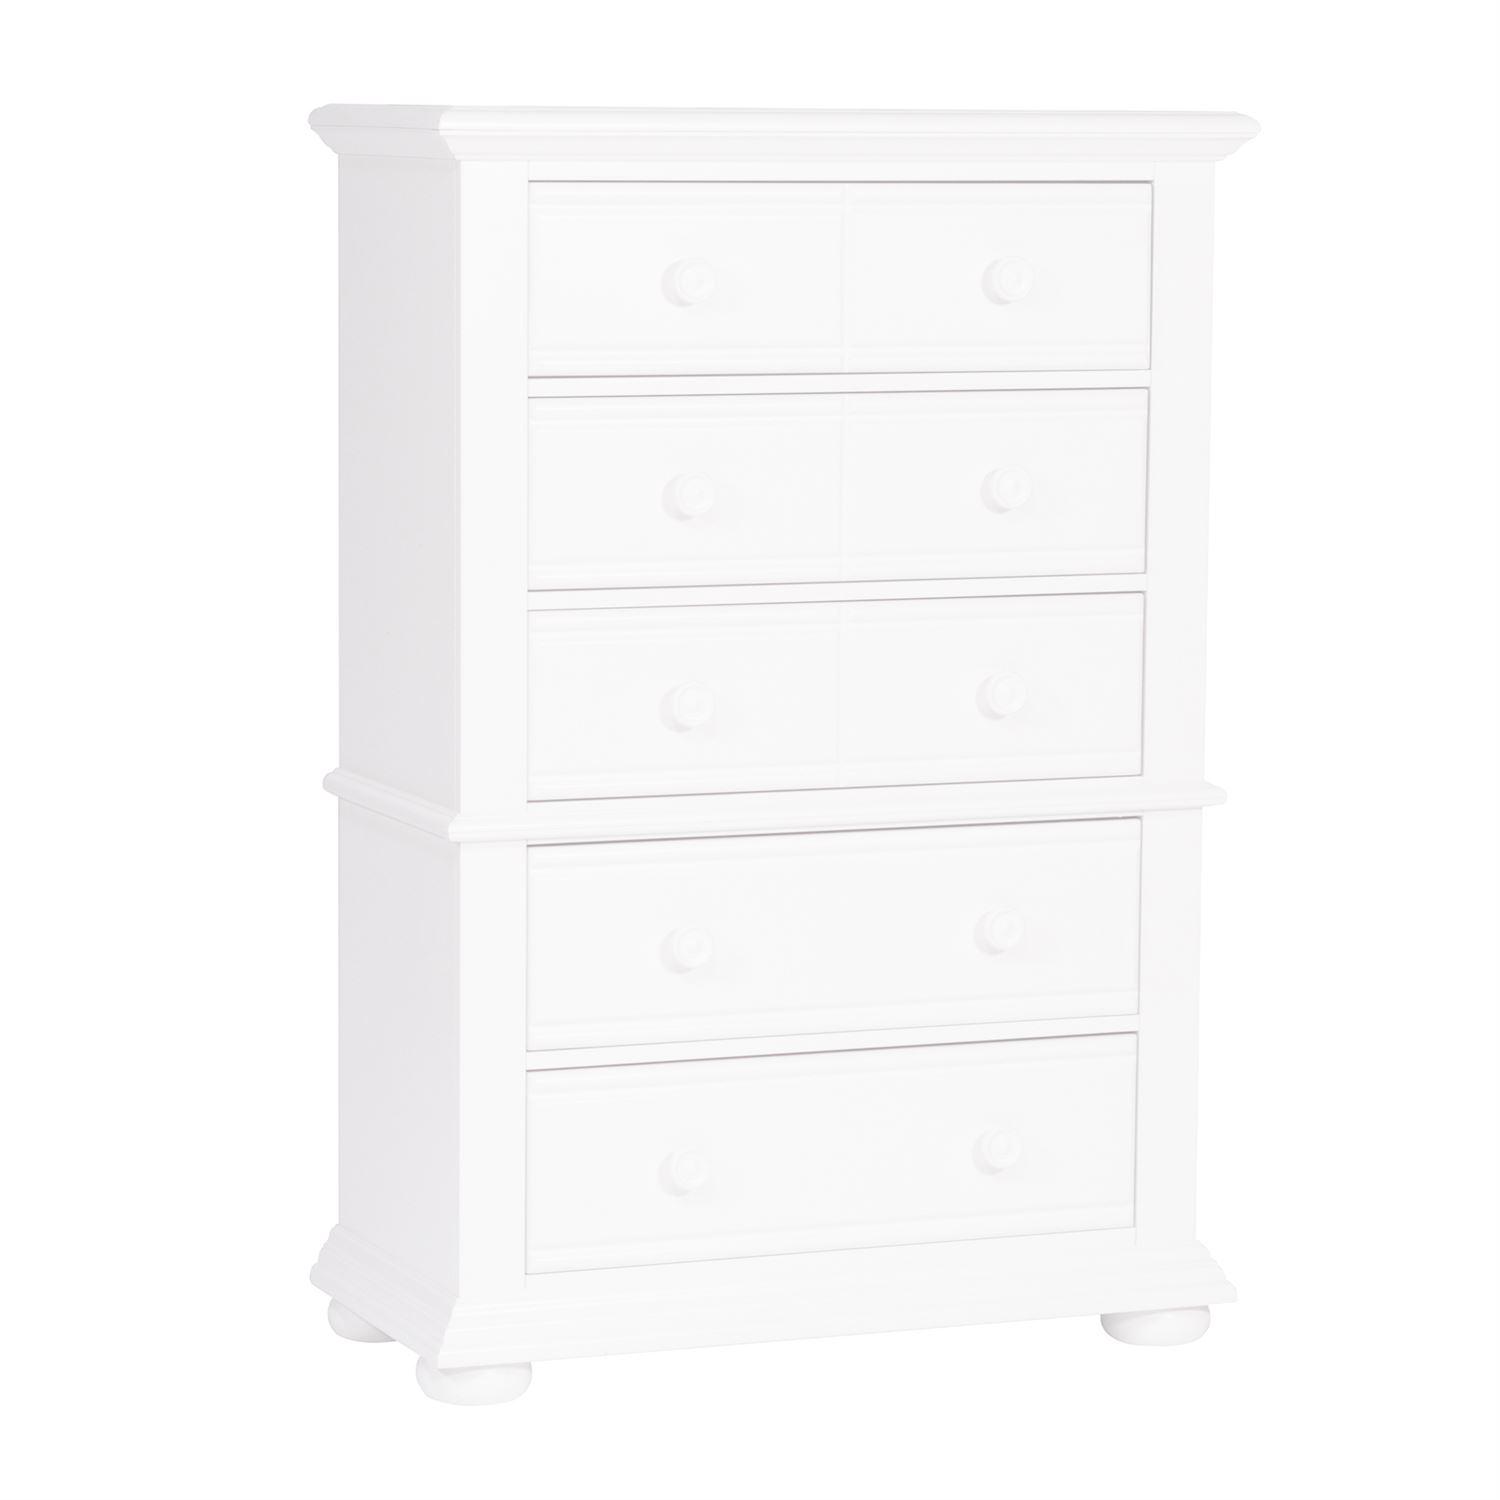 

    
Liberty Furniture Summer House  (607-YBR) Bachelor Chest Bachelor Chest White 607-BR40
